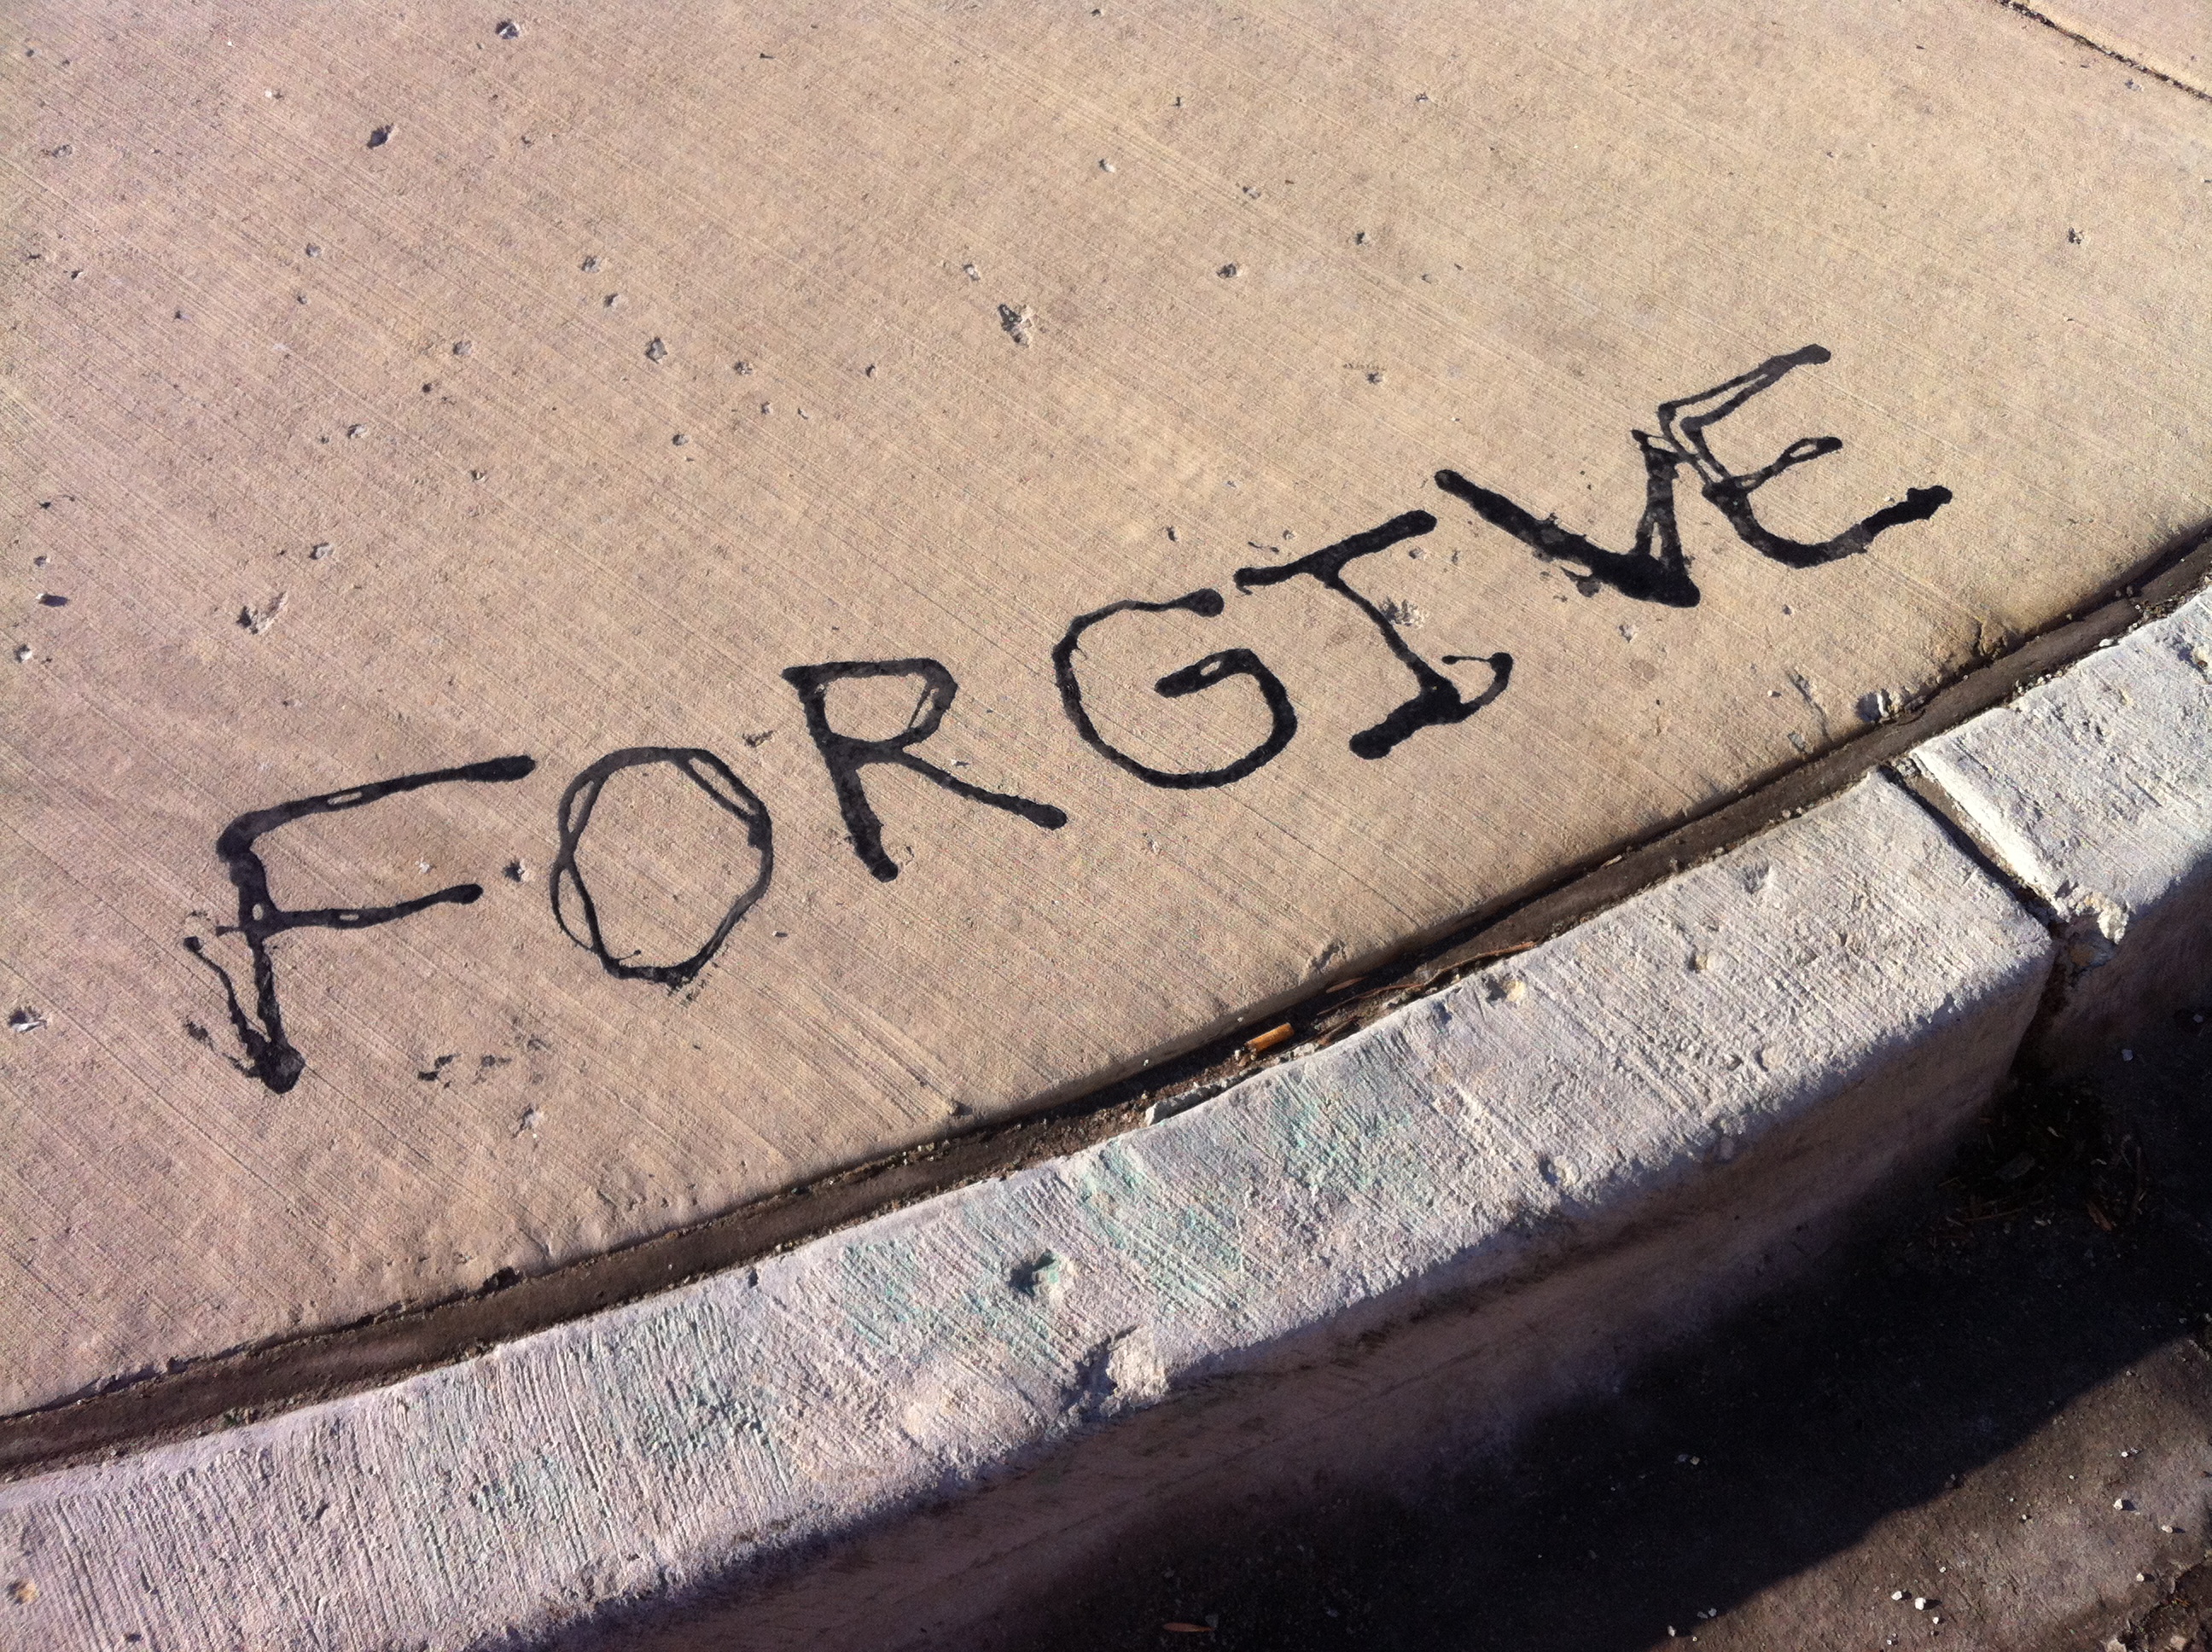 How do I learn to forgive others?